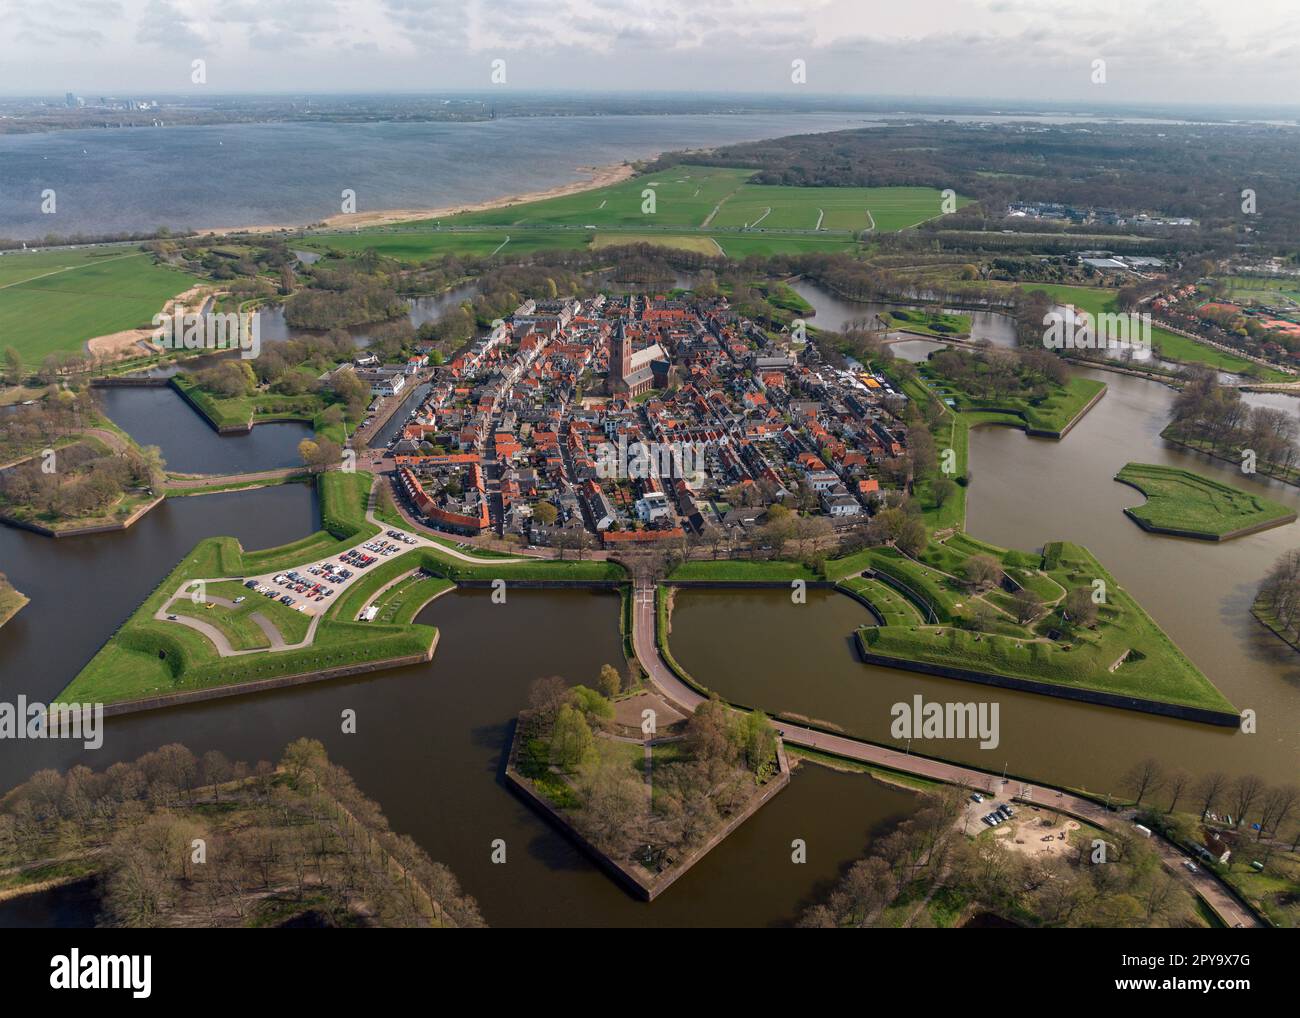 Naarden is a charming town in the Netherlands known for its well-preserved star-shaped fortress, moat, and historic architecture. Visitors can enjoy t Stock Photo